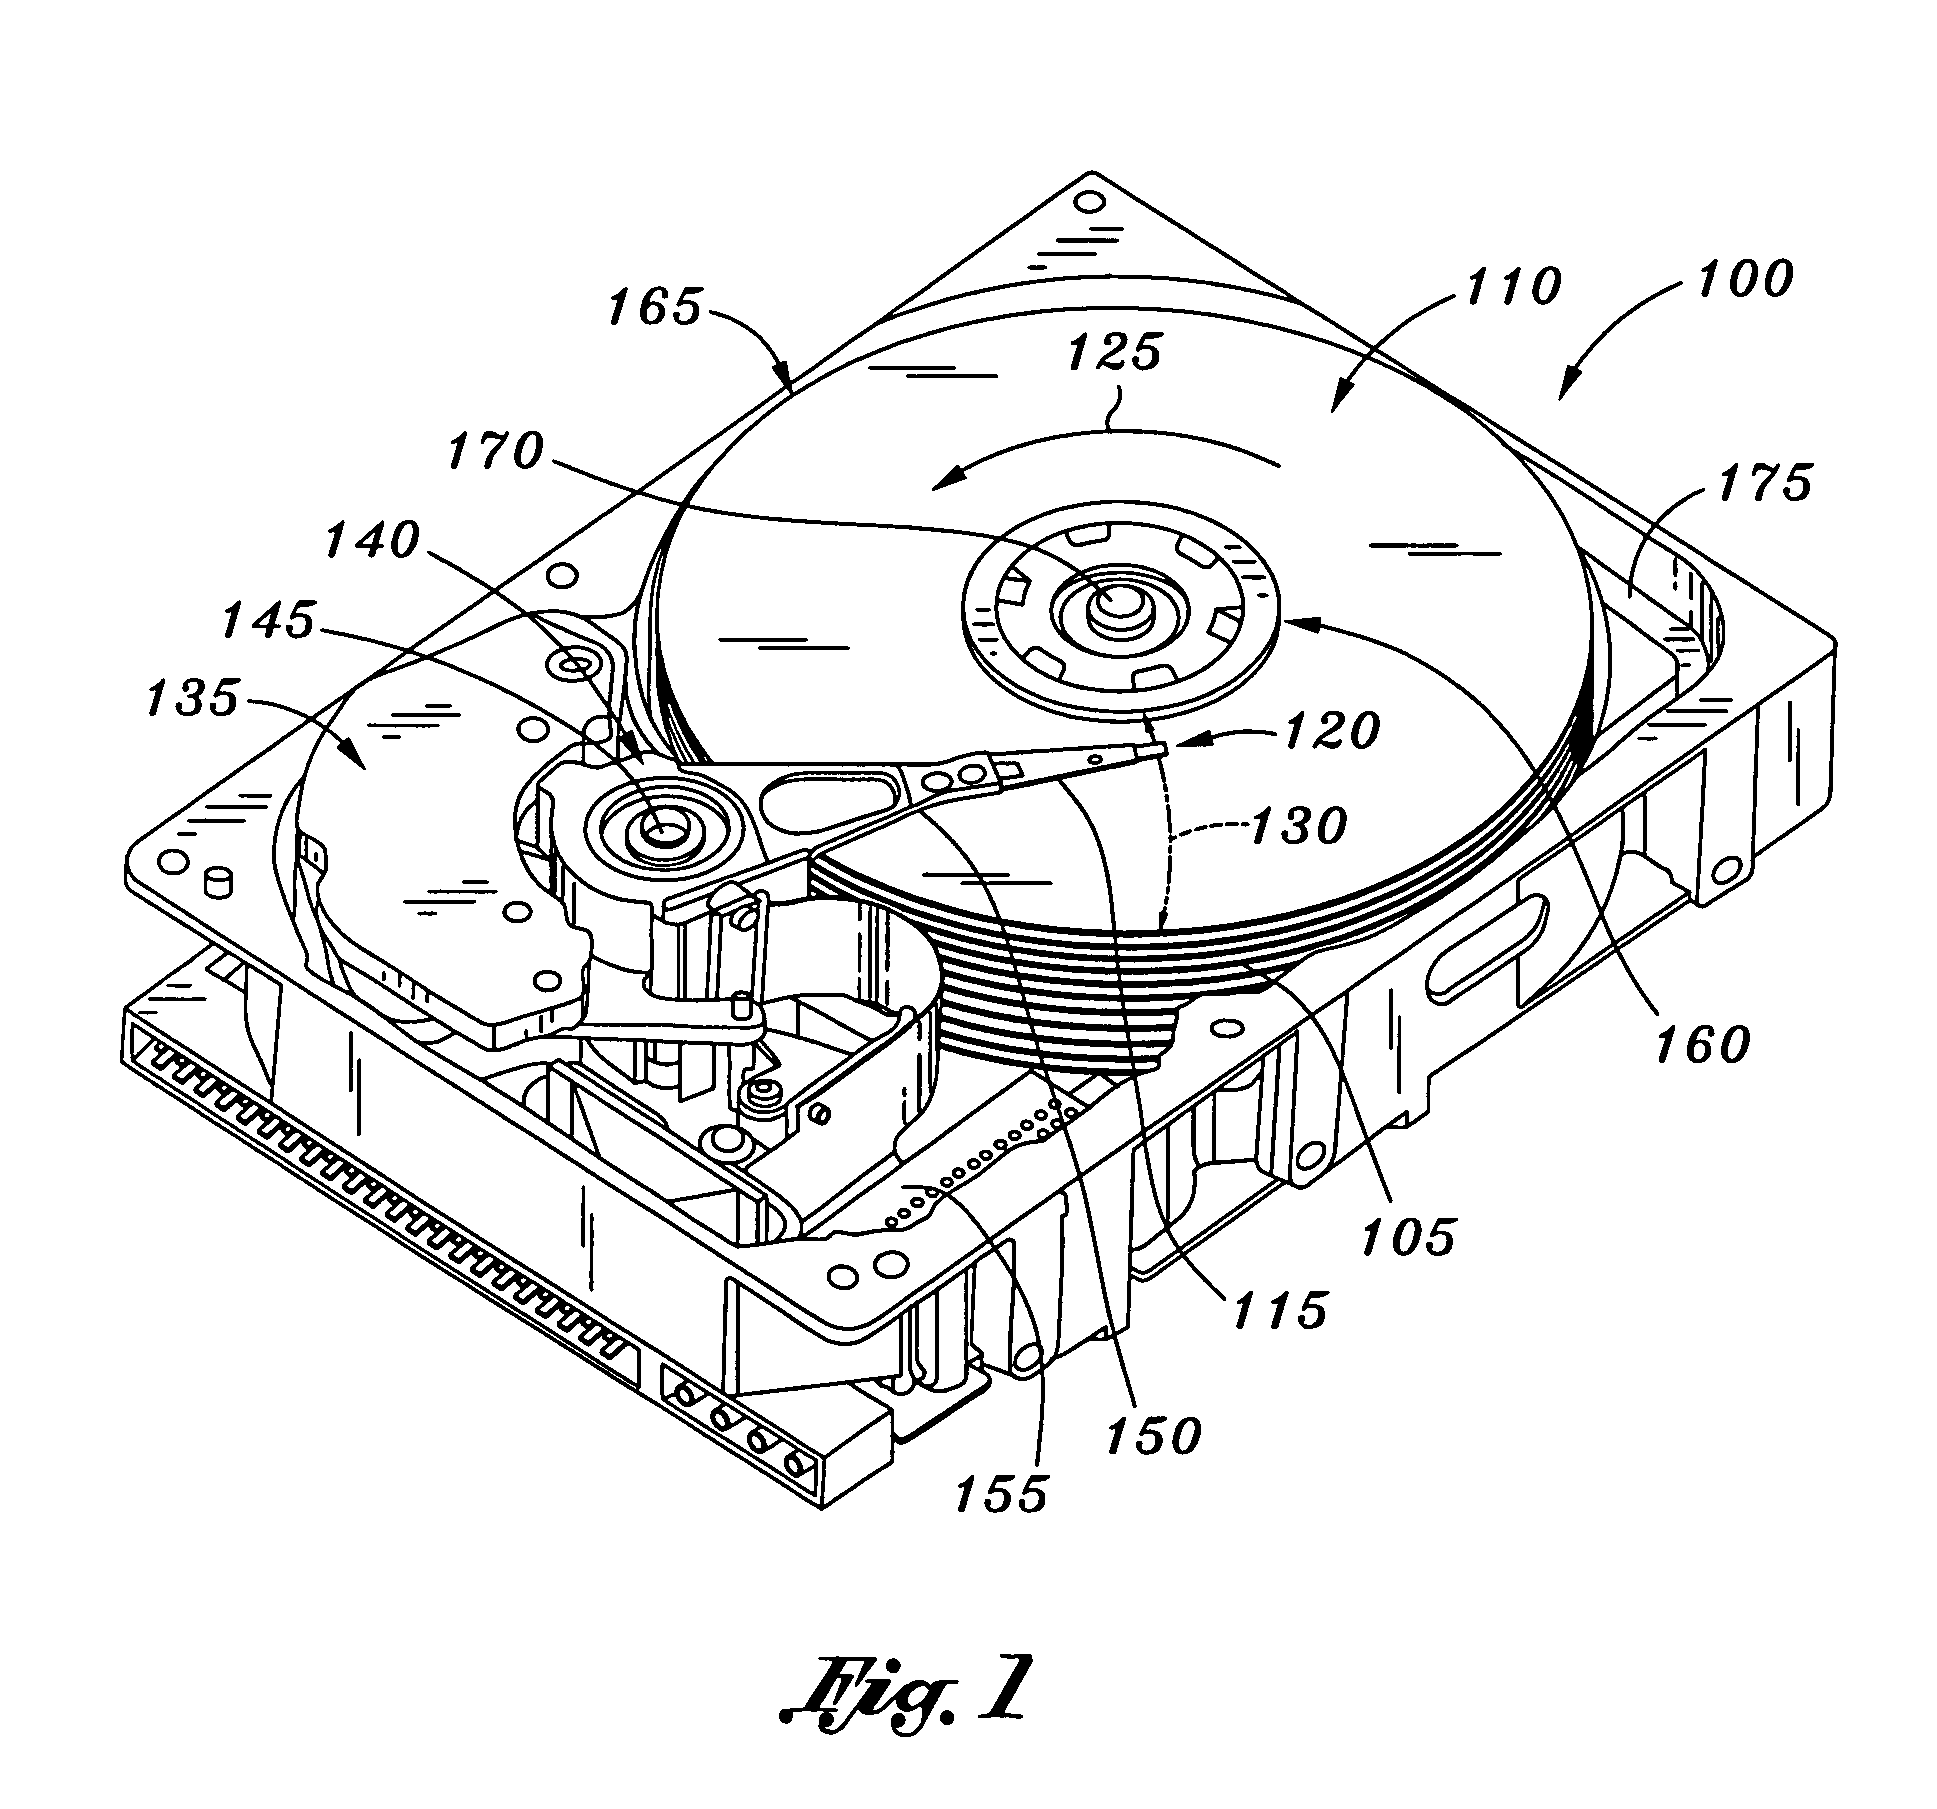 Disk drive with air channel